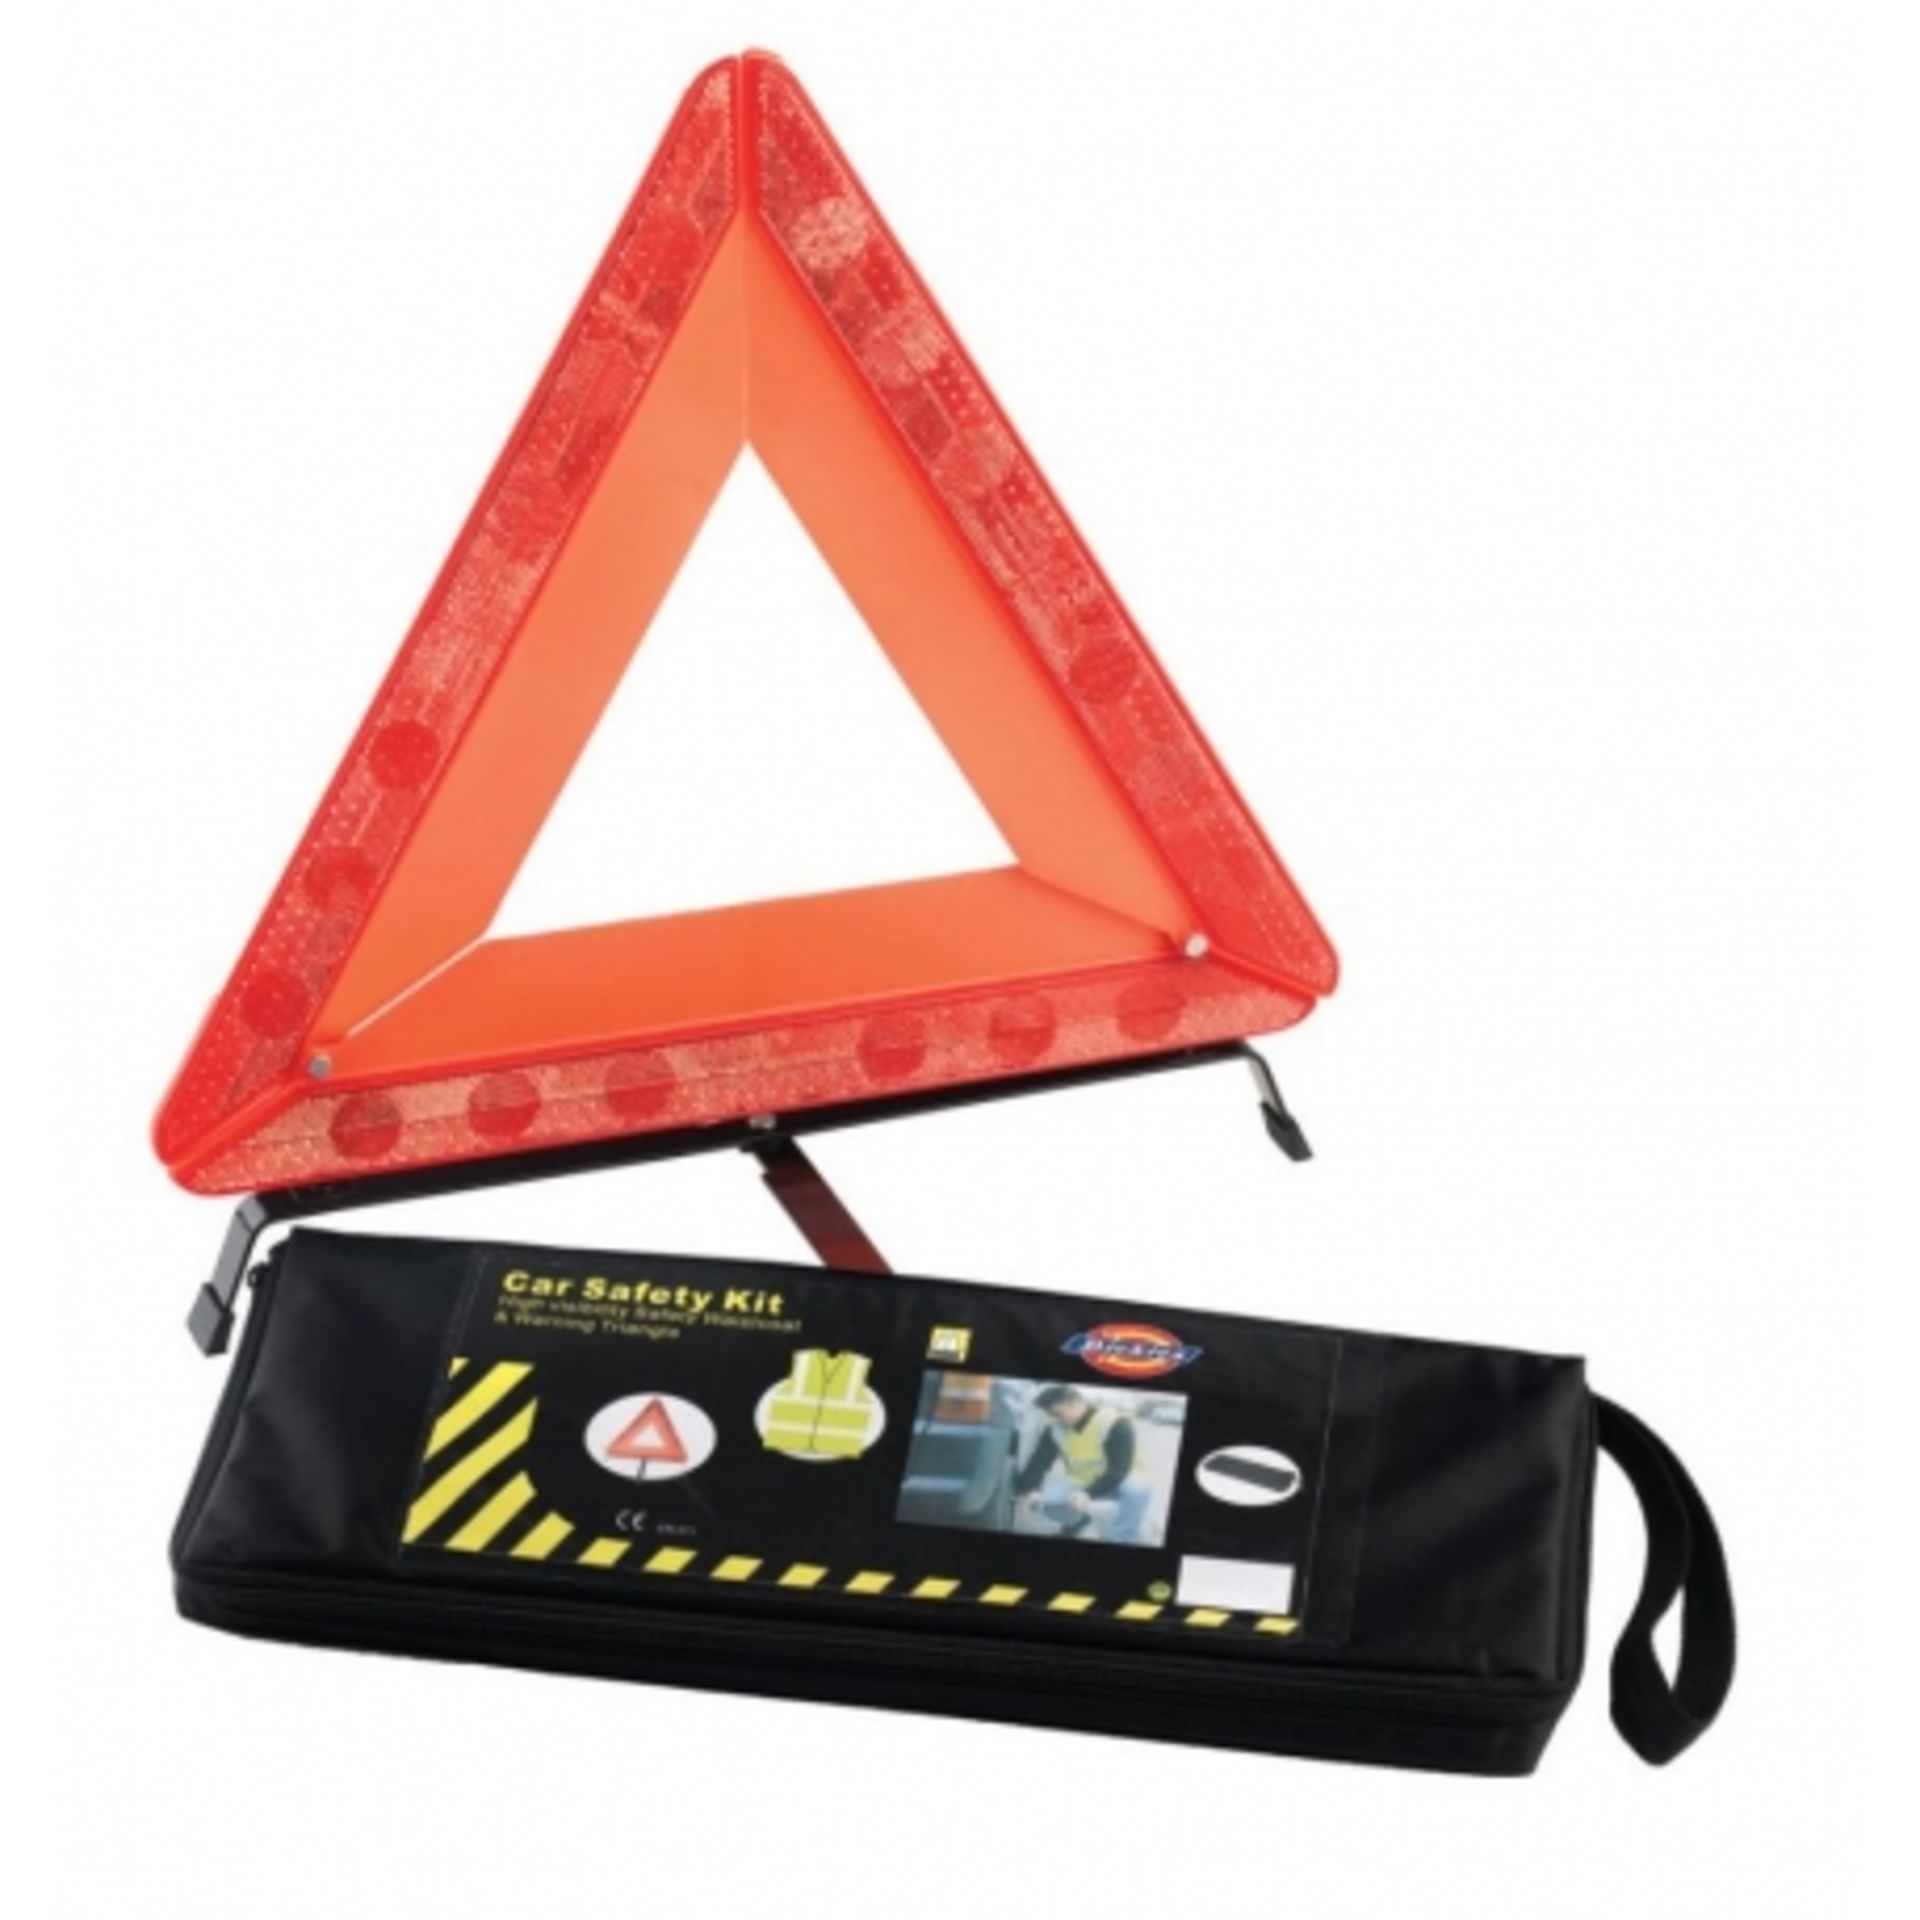 3 x Dickies Reflective Triangle Car Safety Kits - Includes 1 x Set With Hi Vis Jacket and 2 x Sets